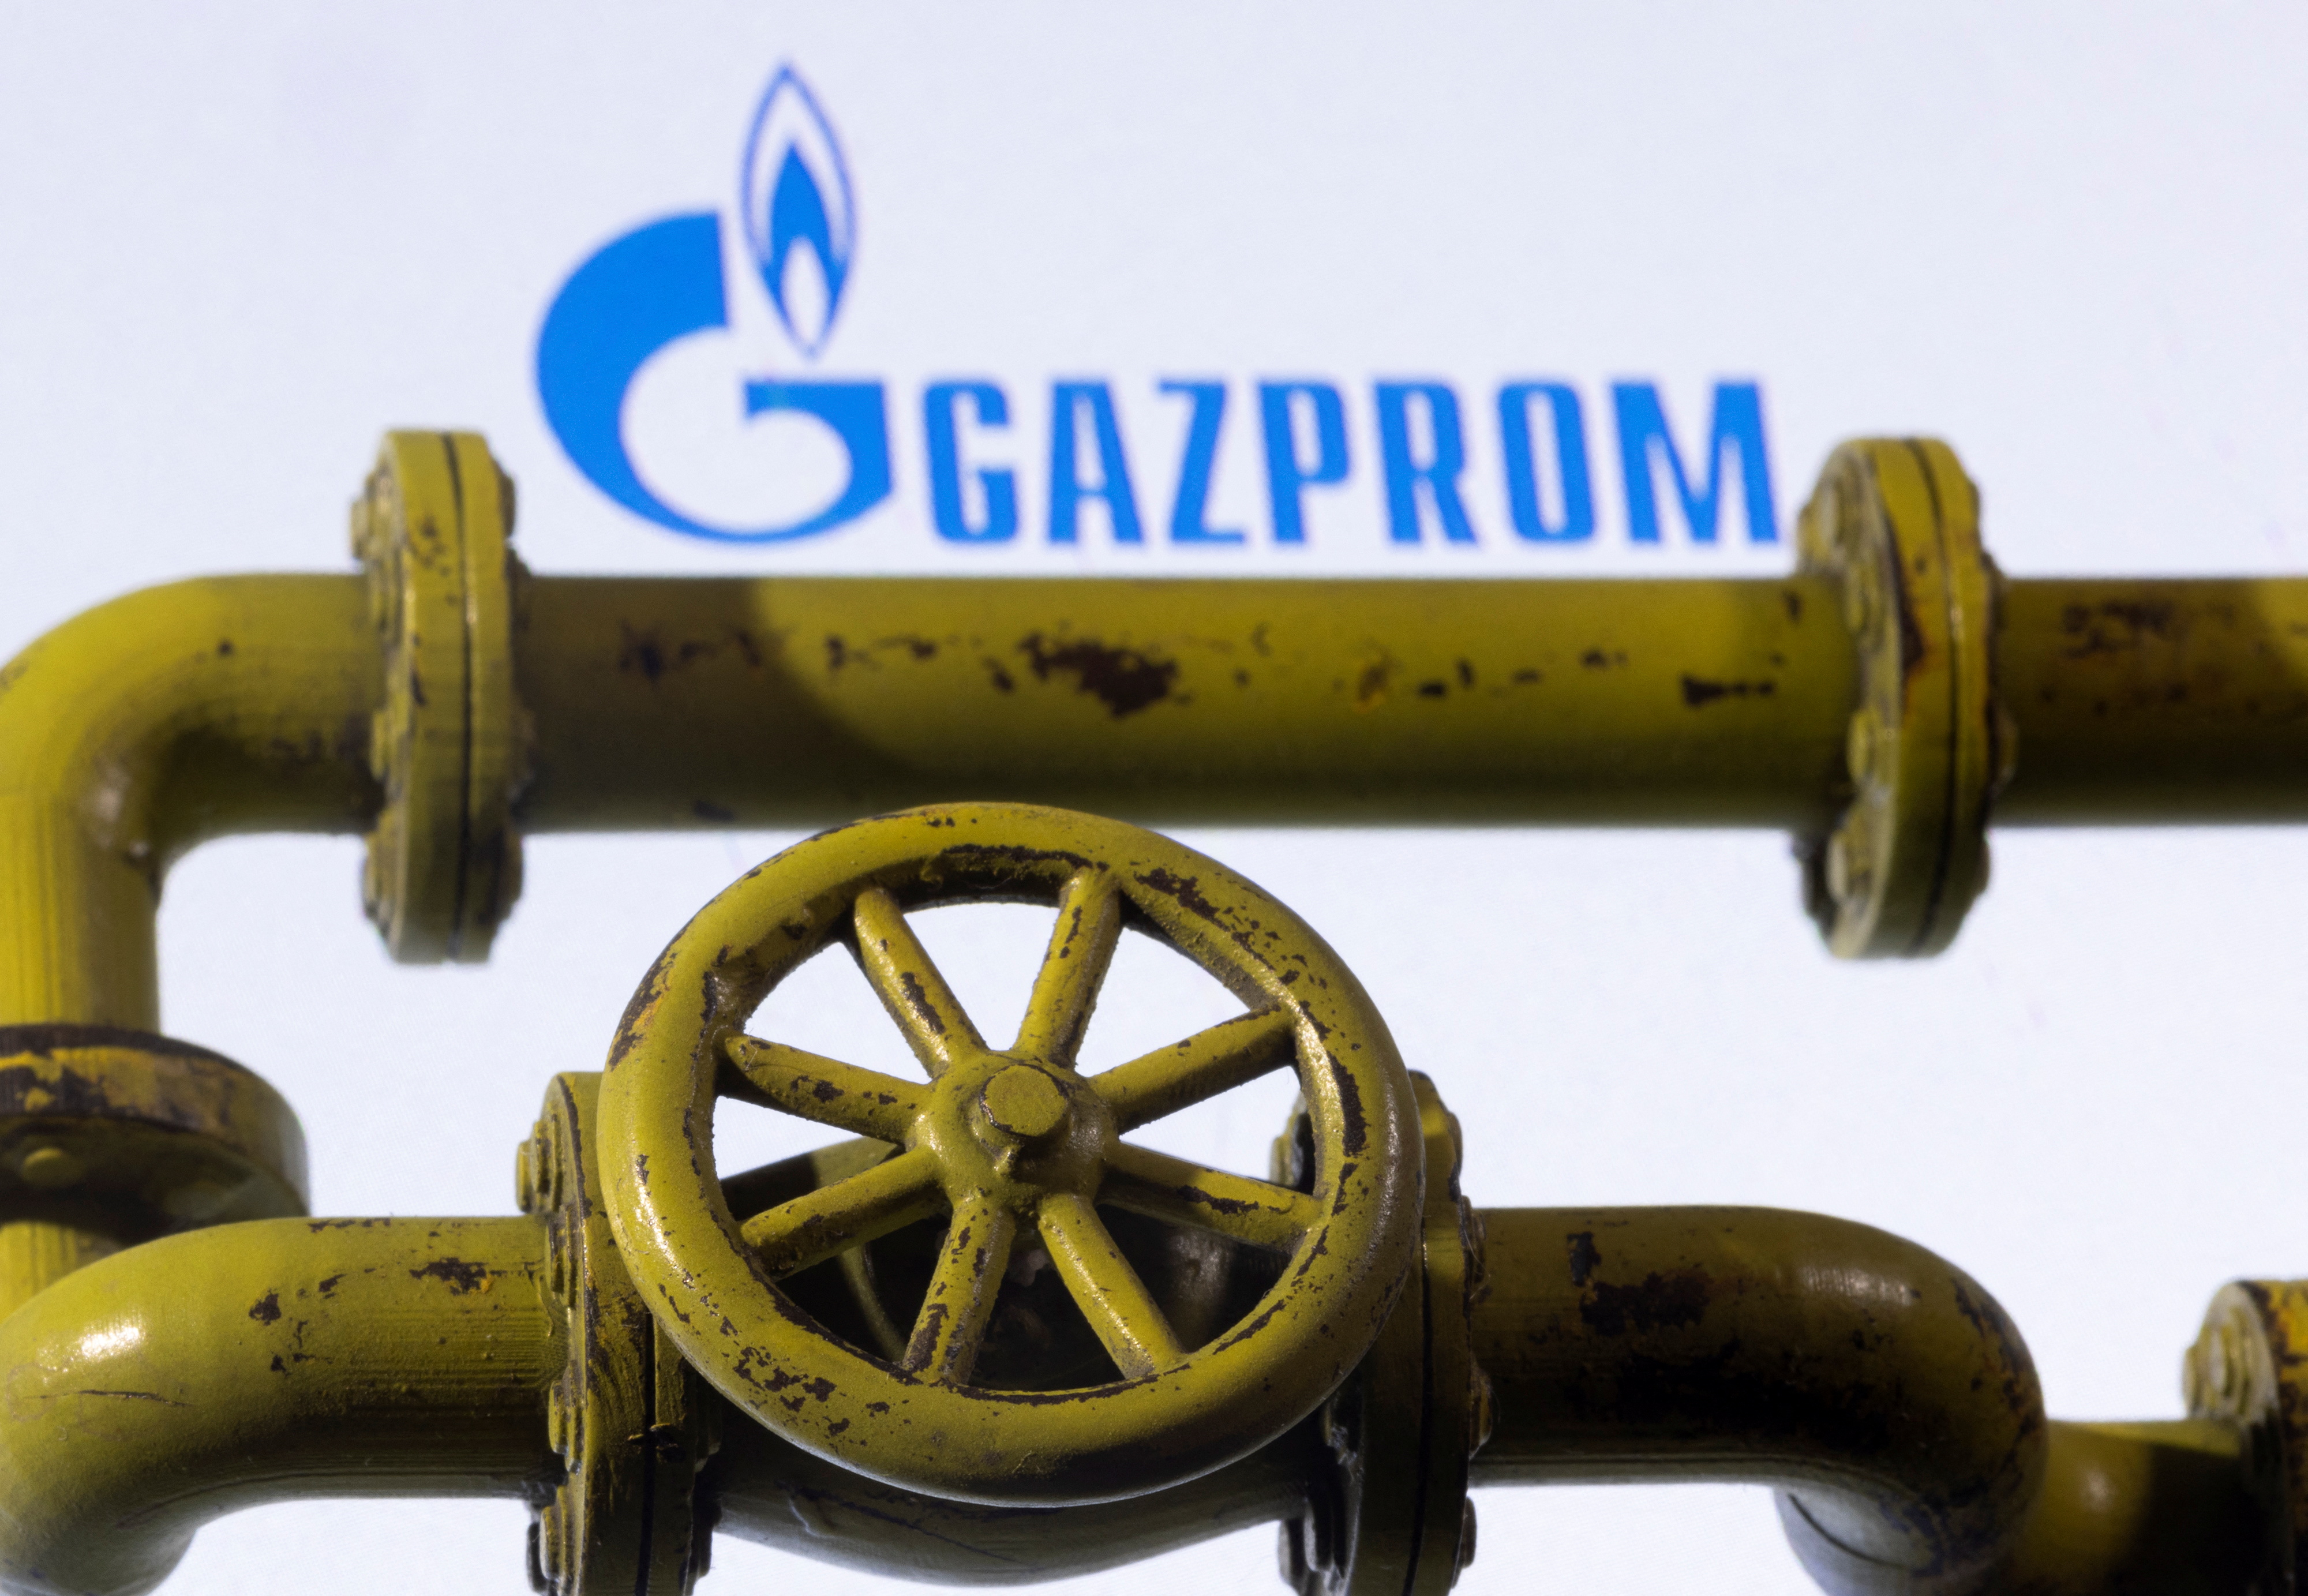 Illustration shows Natural Gas Pipes and Gazprom logo